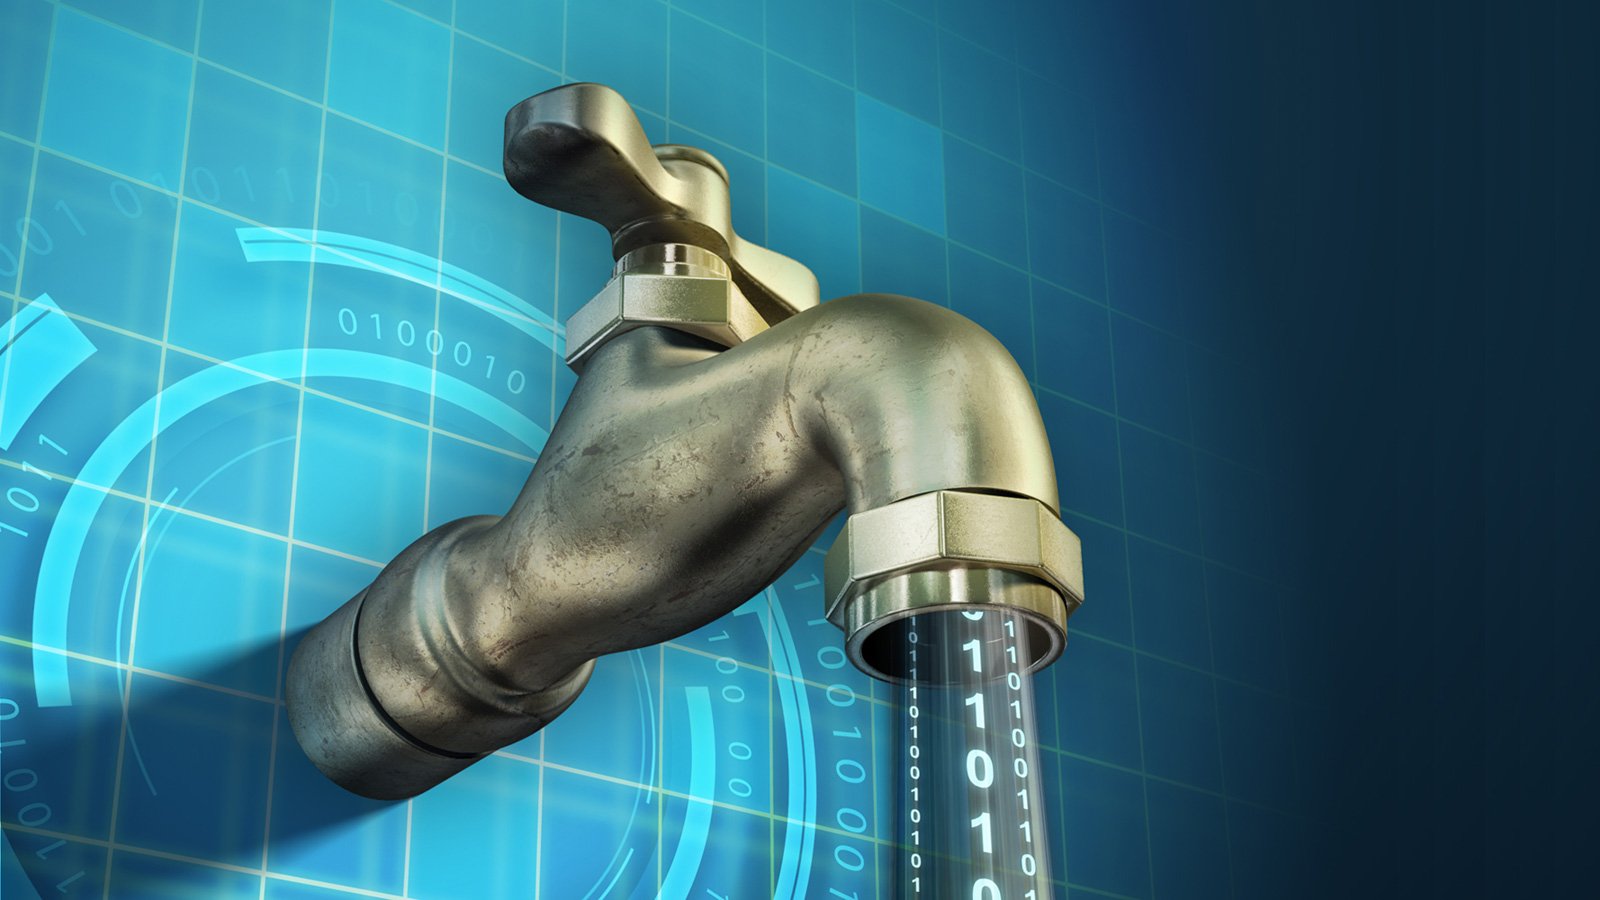 Data flowing from a faucet